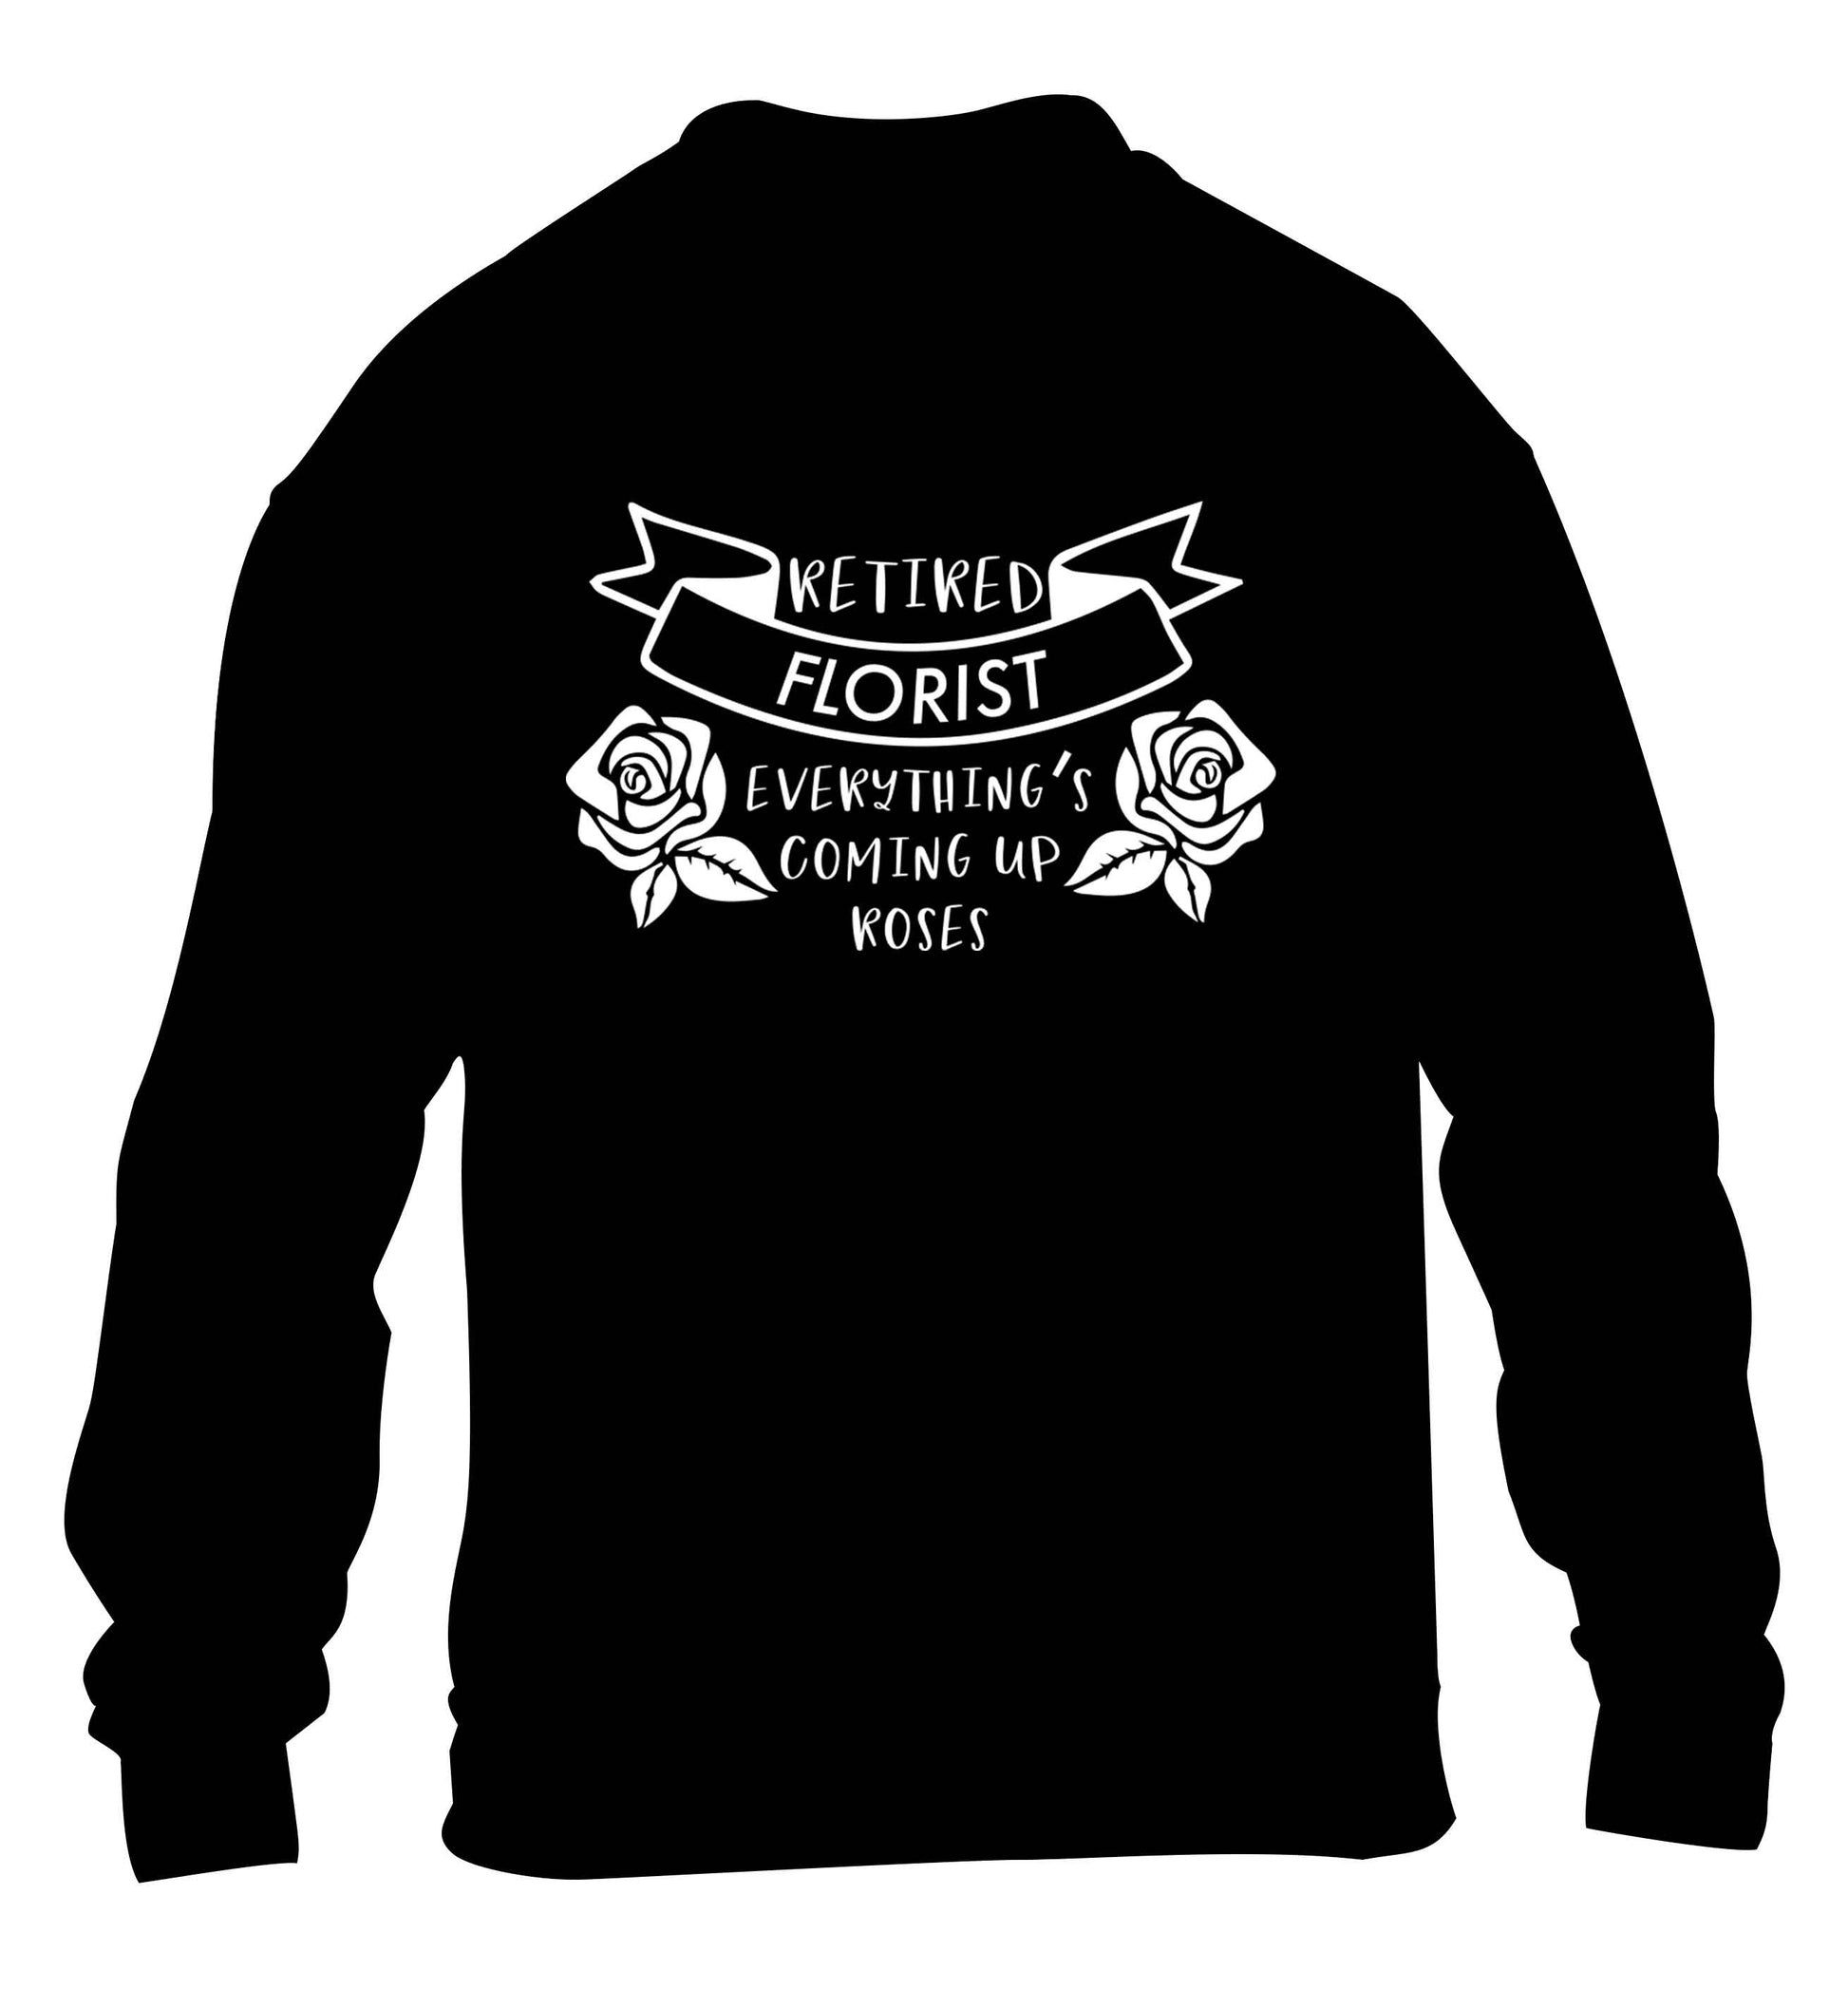 Retired florist everything's coming up roses children's black sweater 12-13 Years